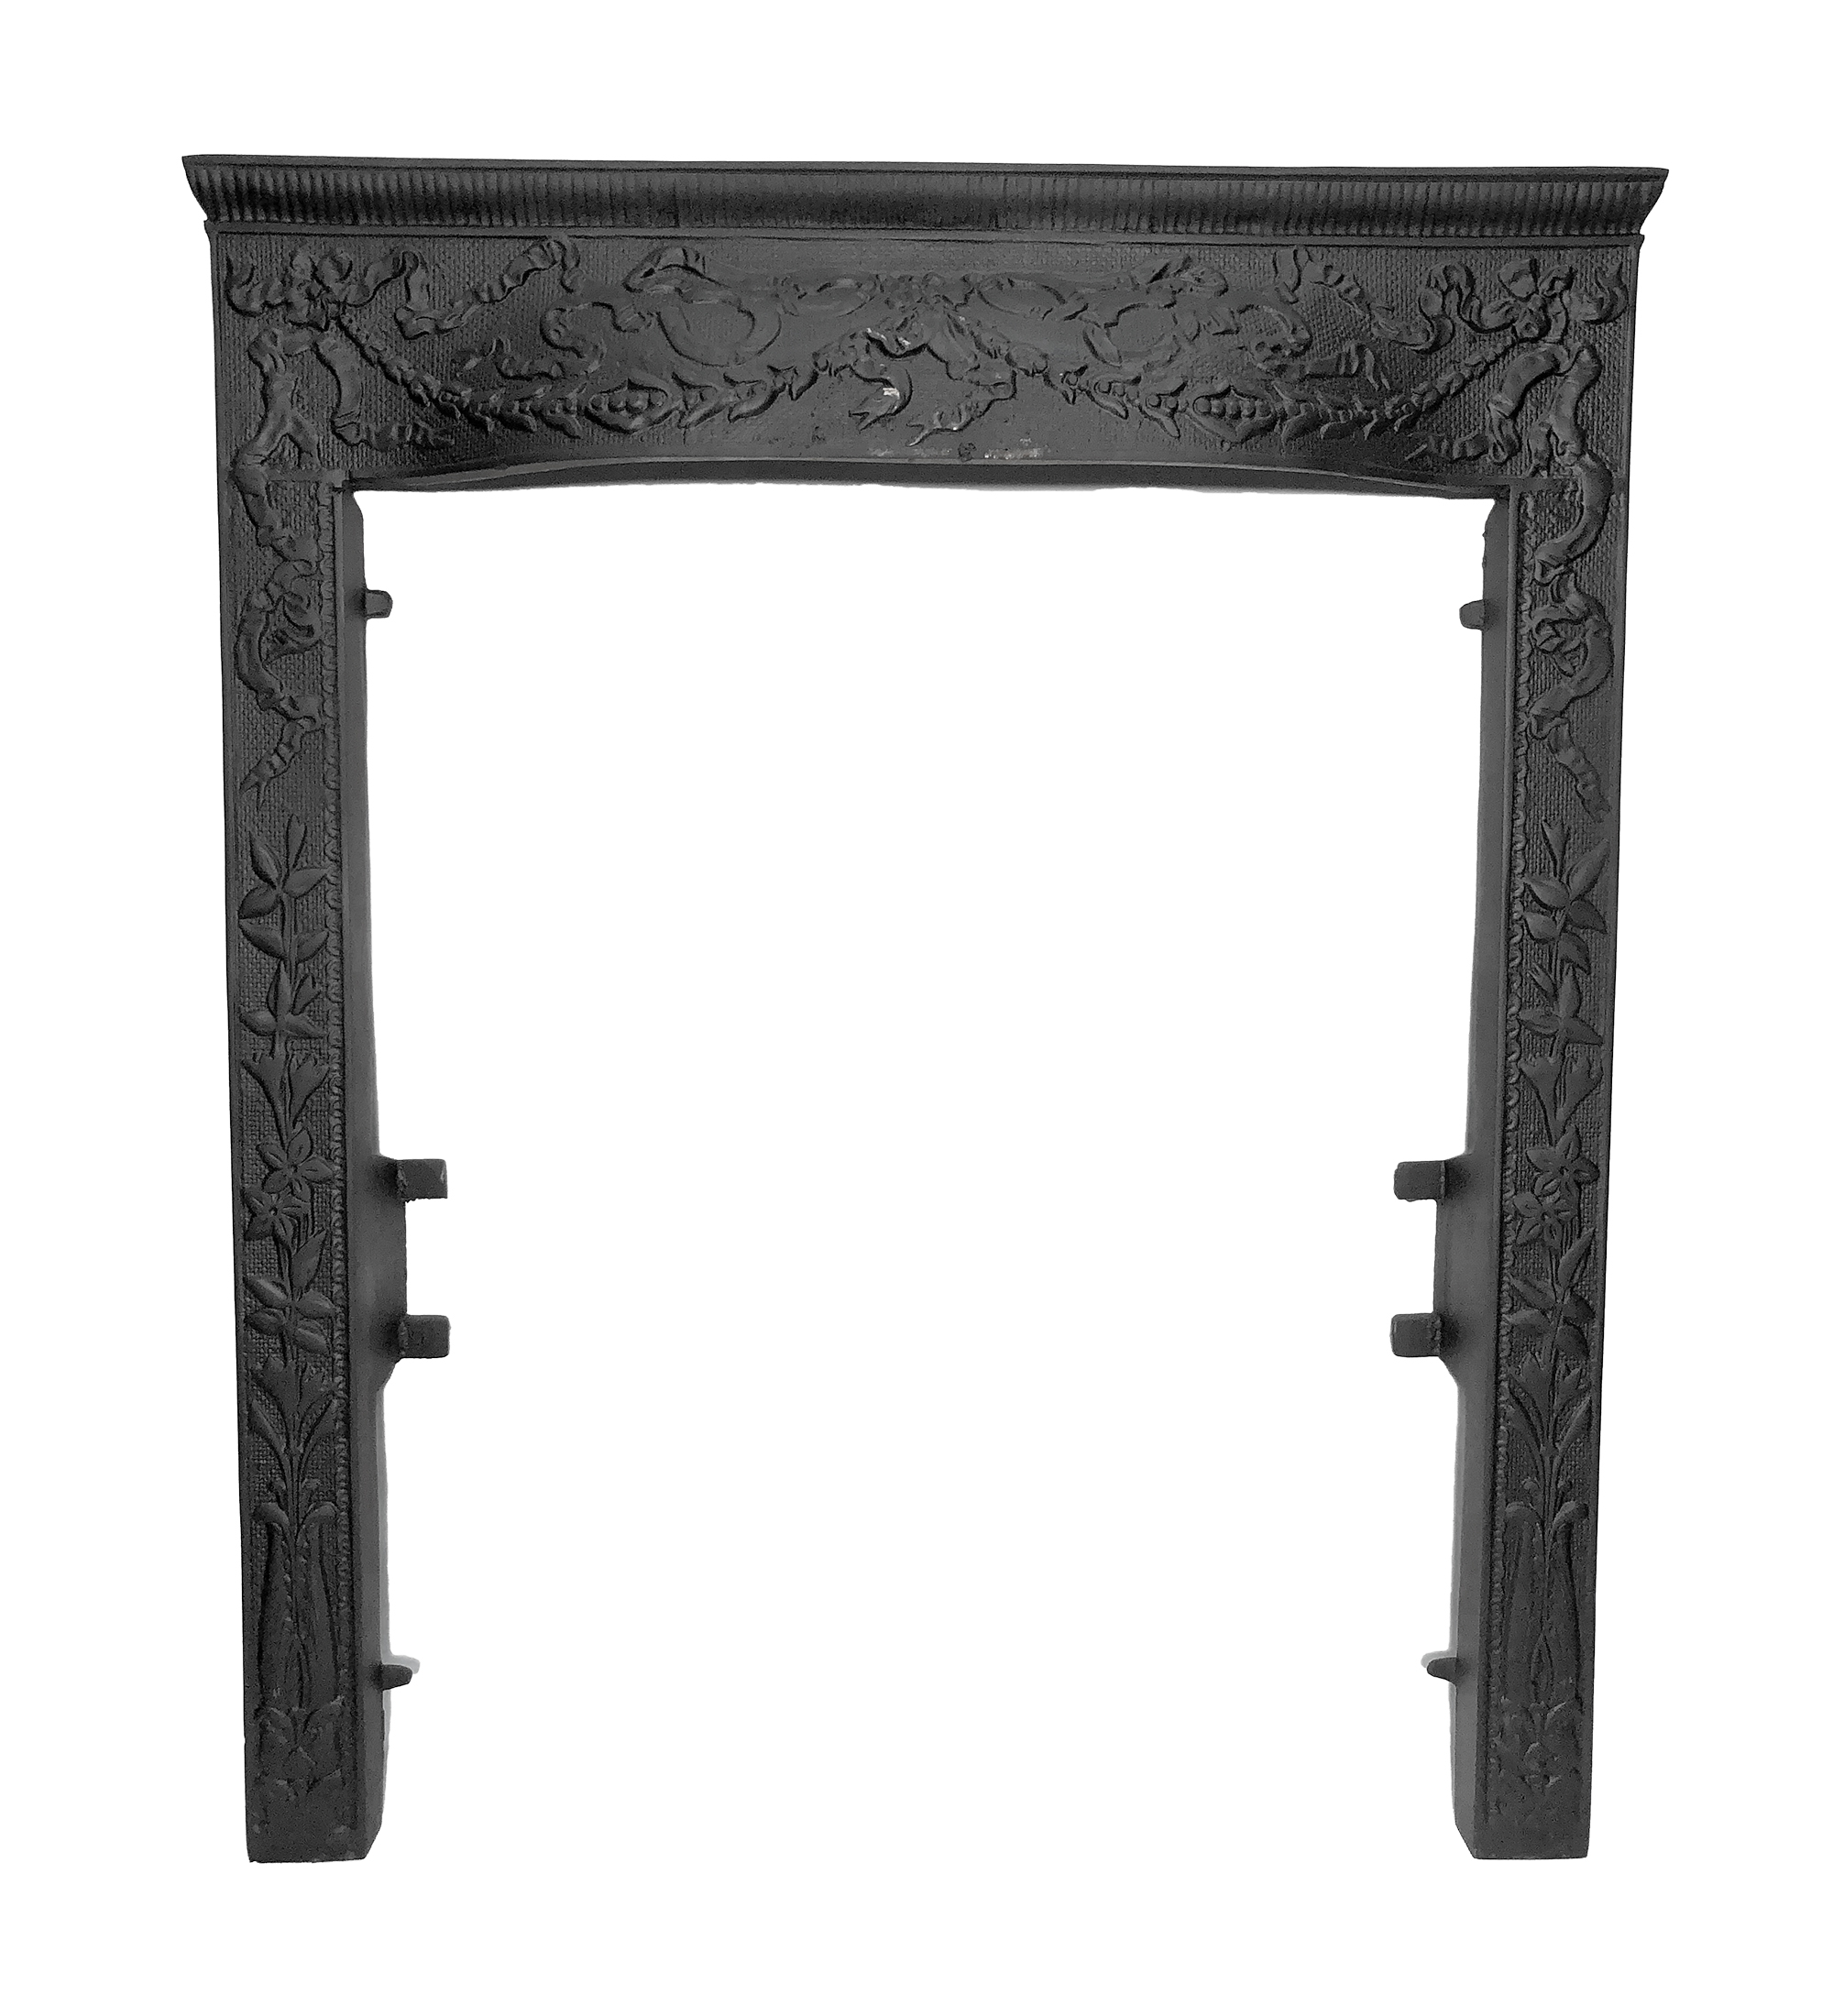 antique fireplace front cover